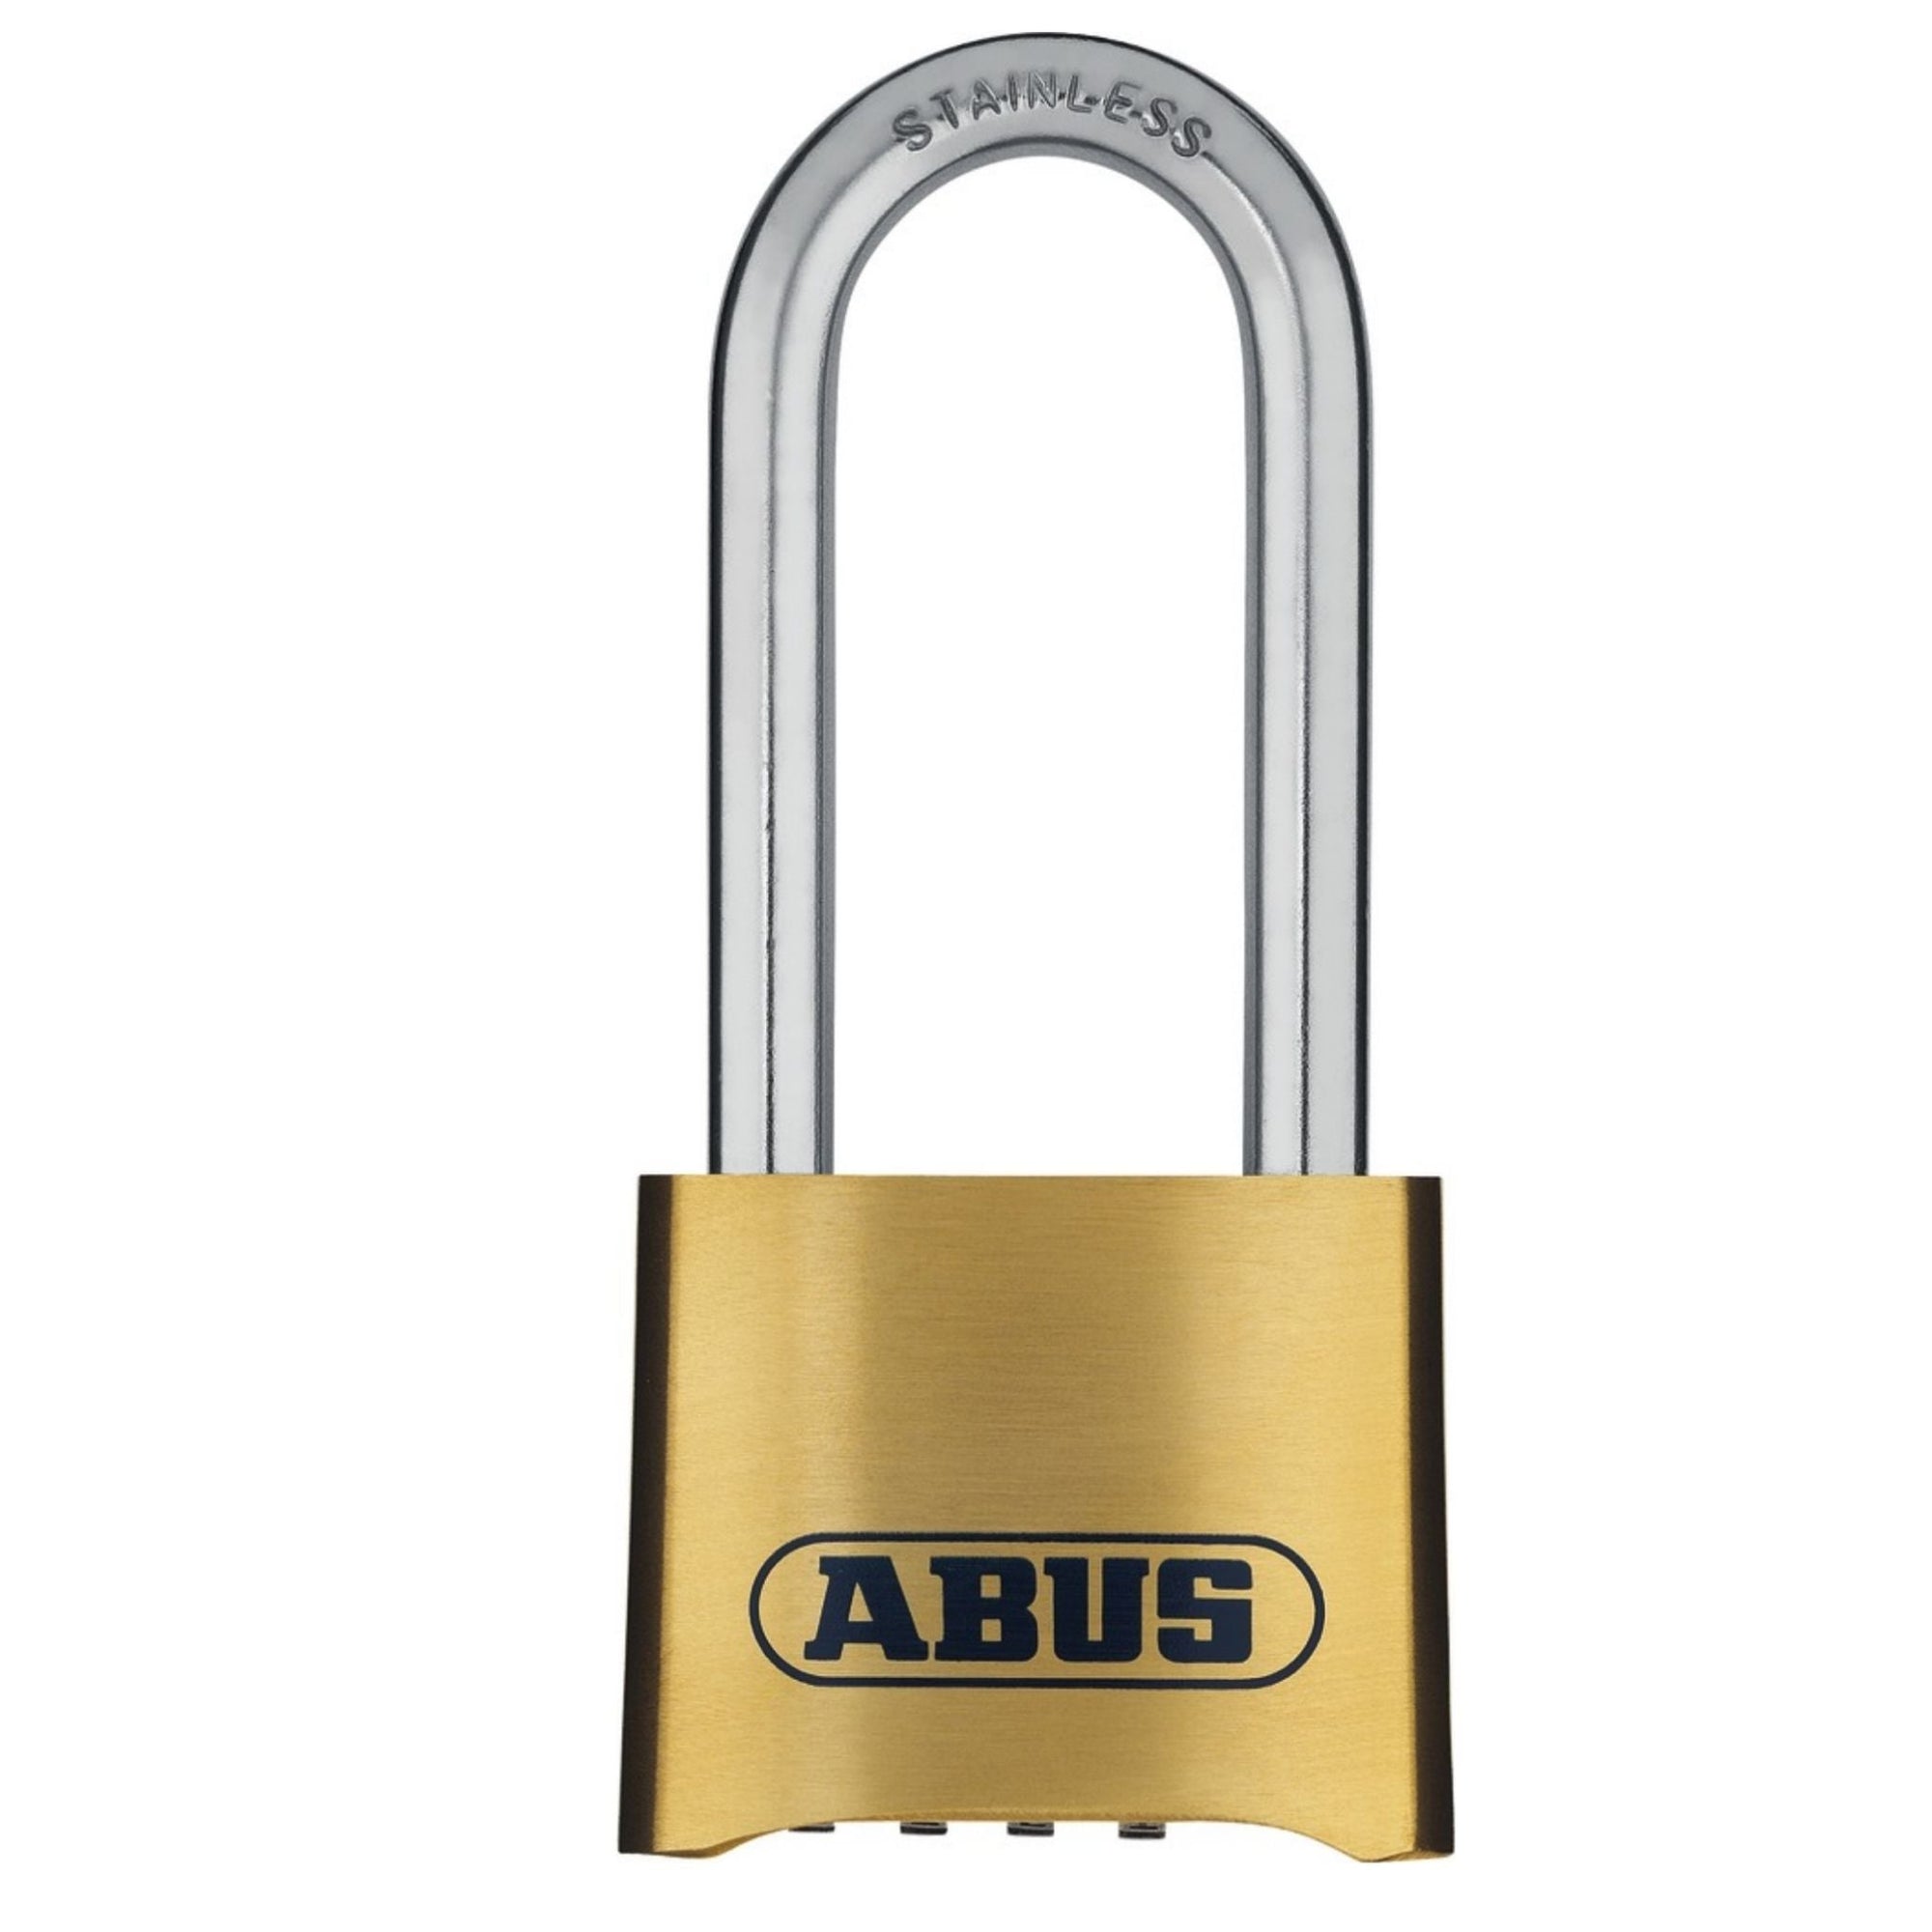 Abus 180IB/50HB63 Brass Combination Padlock with 2" Shackle Set-of-4 Locks - The Lock Source